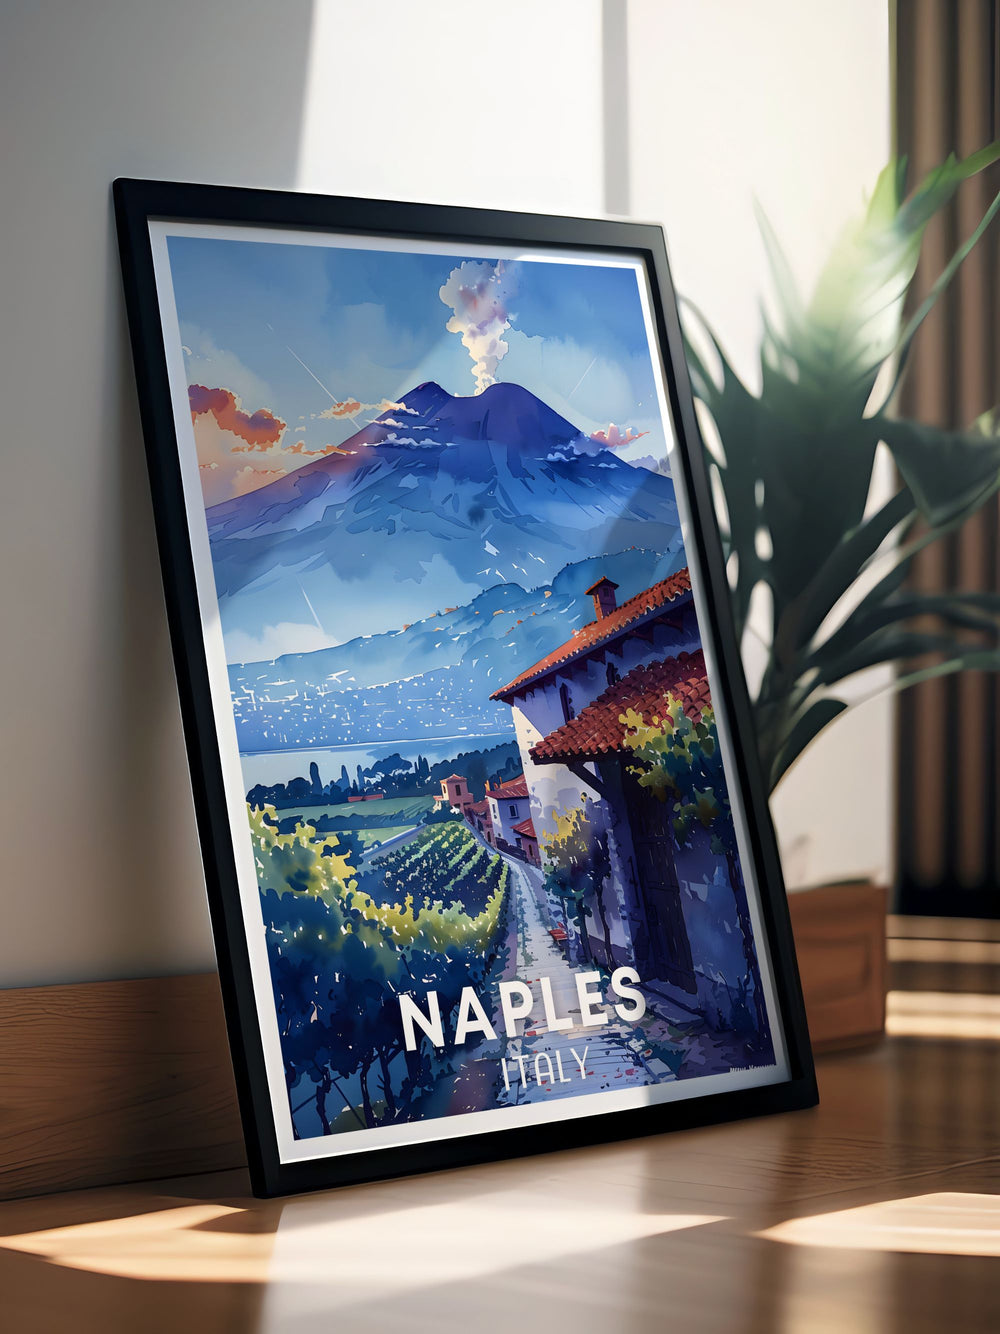 Beautiful NAPLES Poster featuring the iconic skyline of Naples Italy with the majestic Mount Vesuvius. A great addition to your wall art collection. Perfect for anyone who loves Italy and its stunning landscapes.